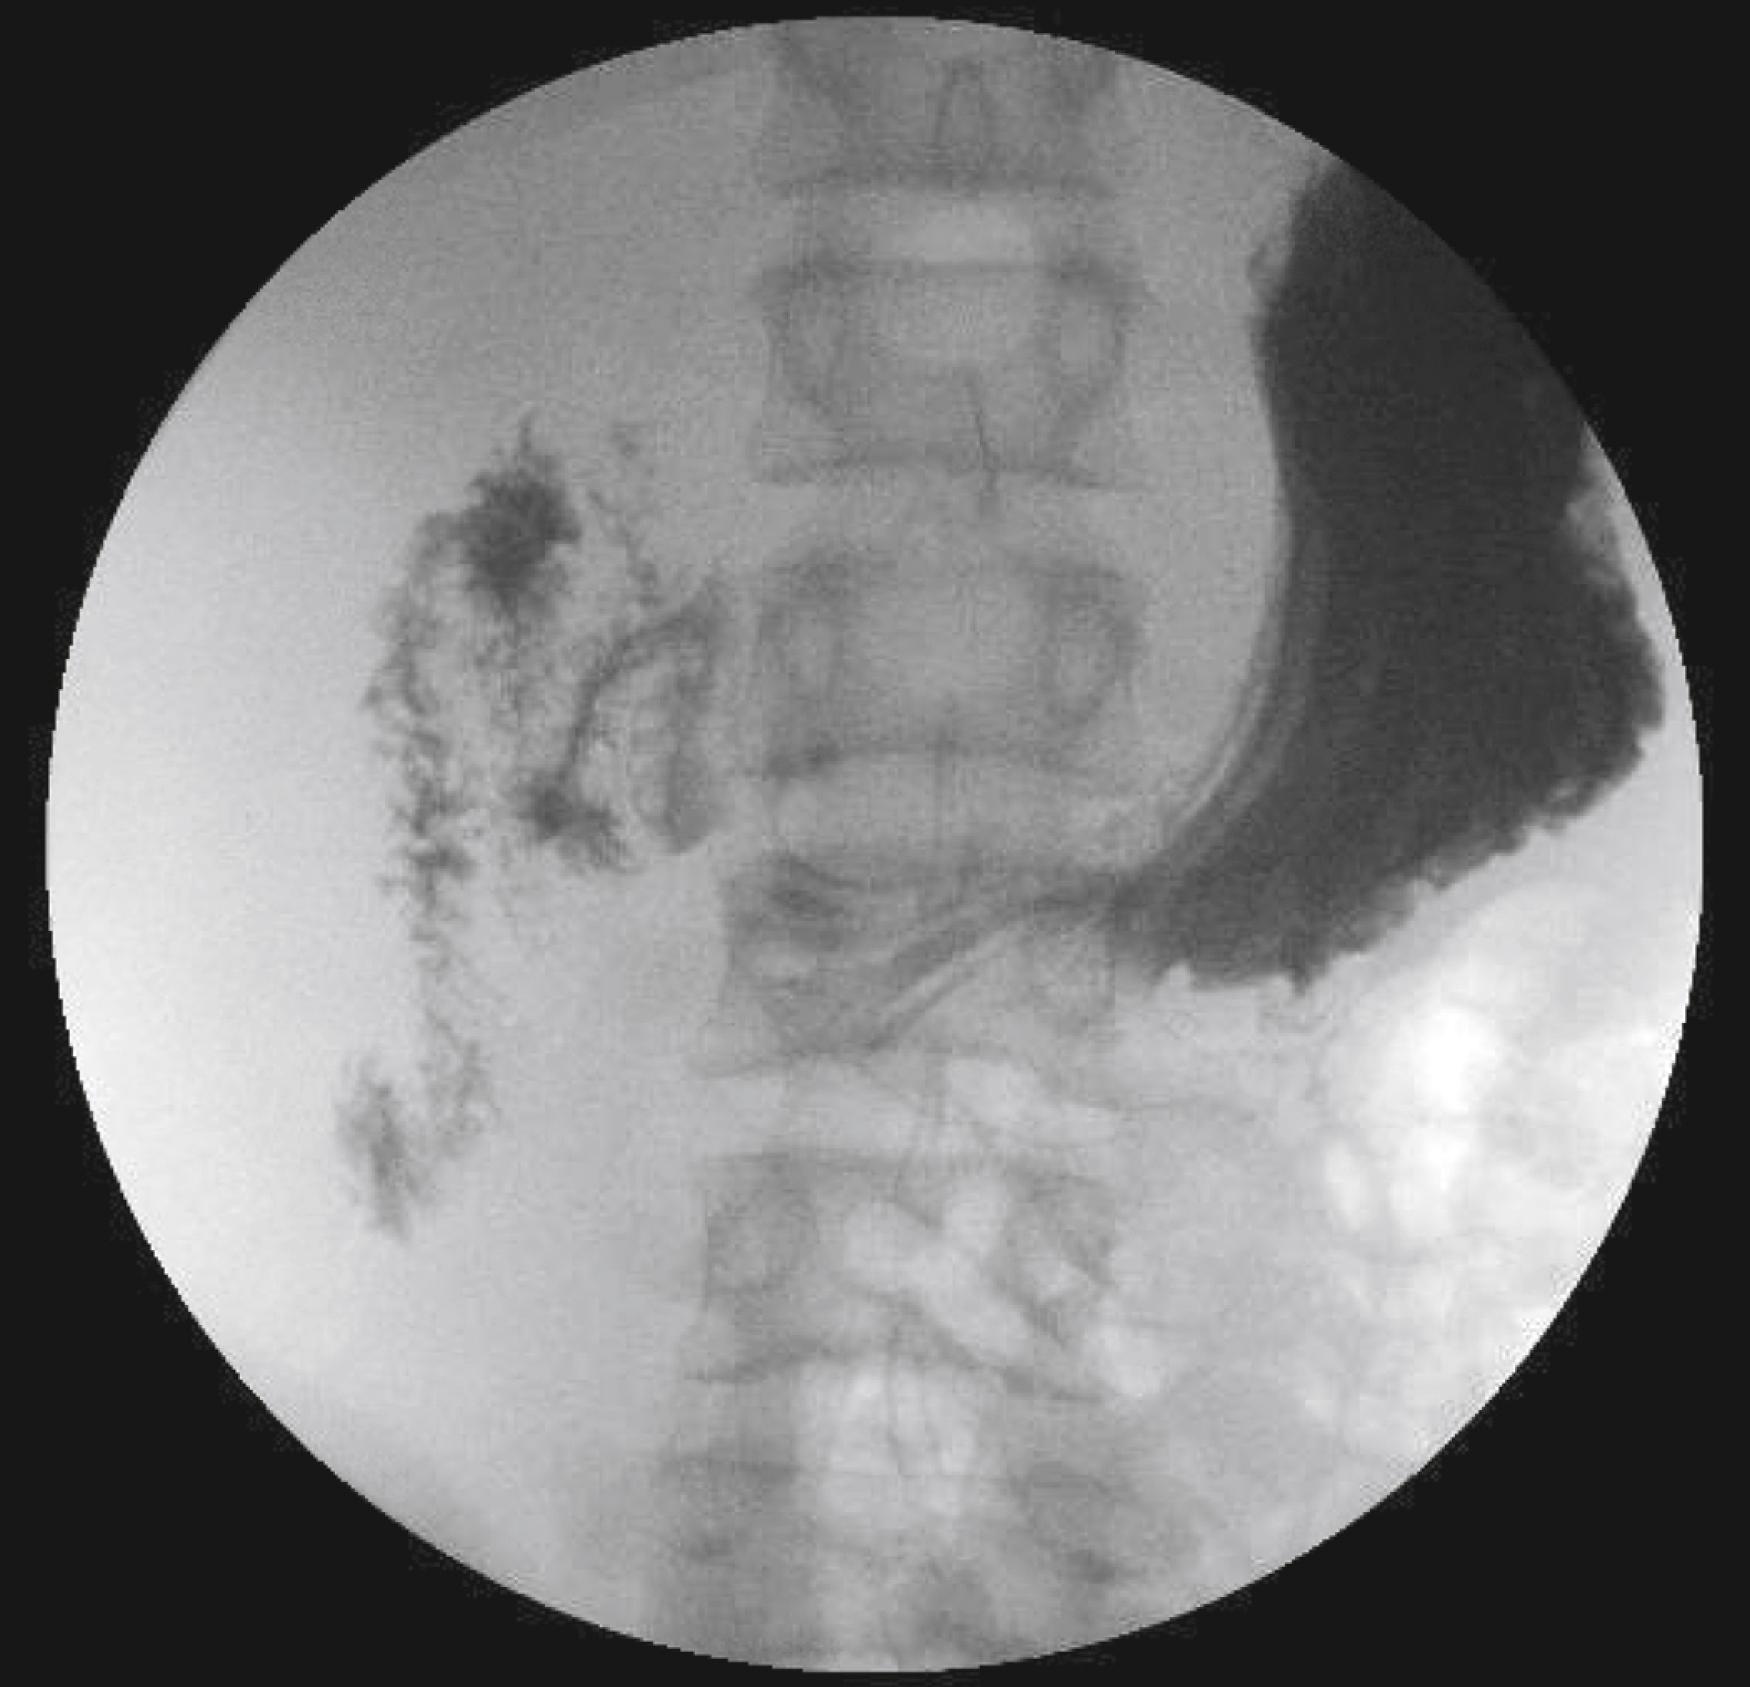 Fig. 15.9, Contrast fluoroscopy (upper gastrointestinal series) demonstrating malrotation. Note the small bowel fills with contrast all to the right of midline and does not cross over the left upper quadrant where the ligament of Treitz would be normally located.